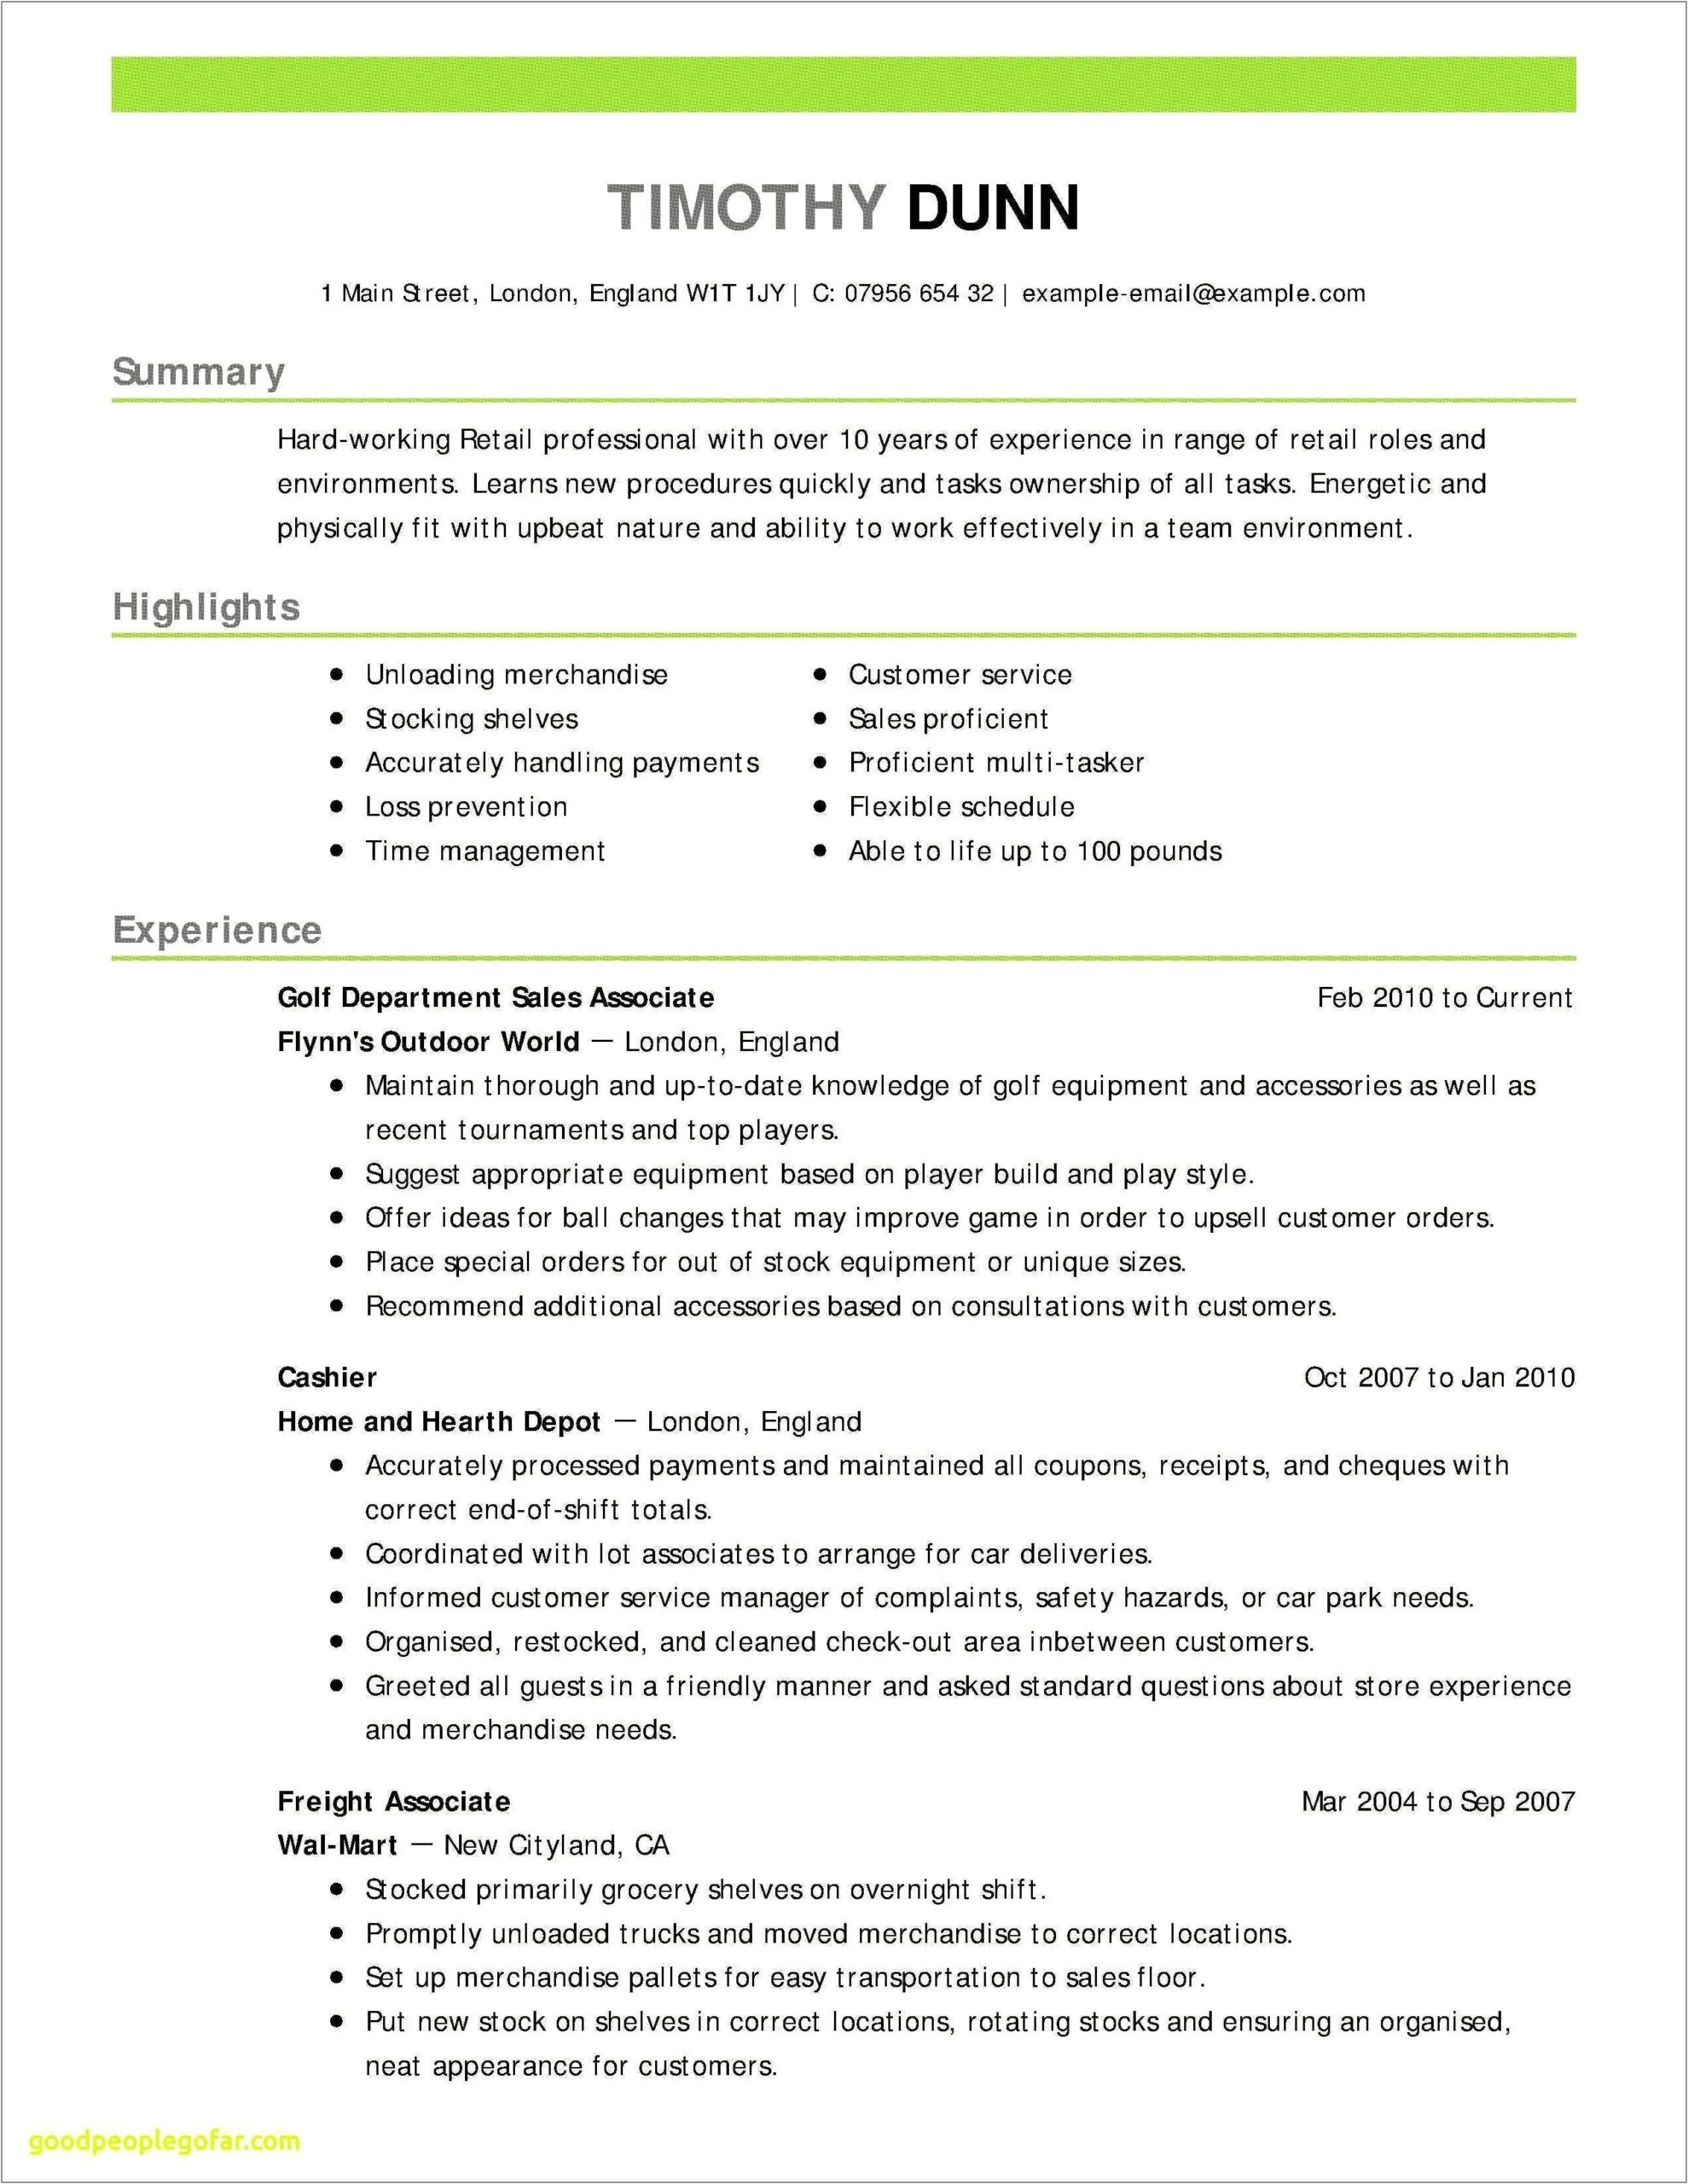 Sample Resume For Experienced Business Analyst Download